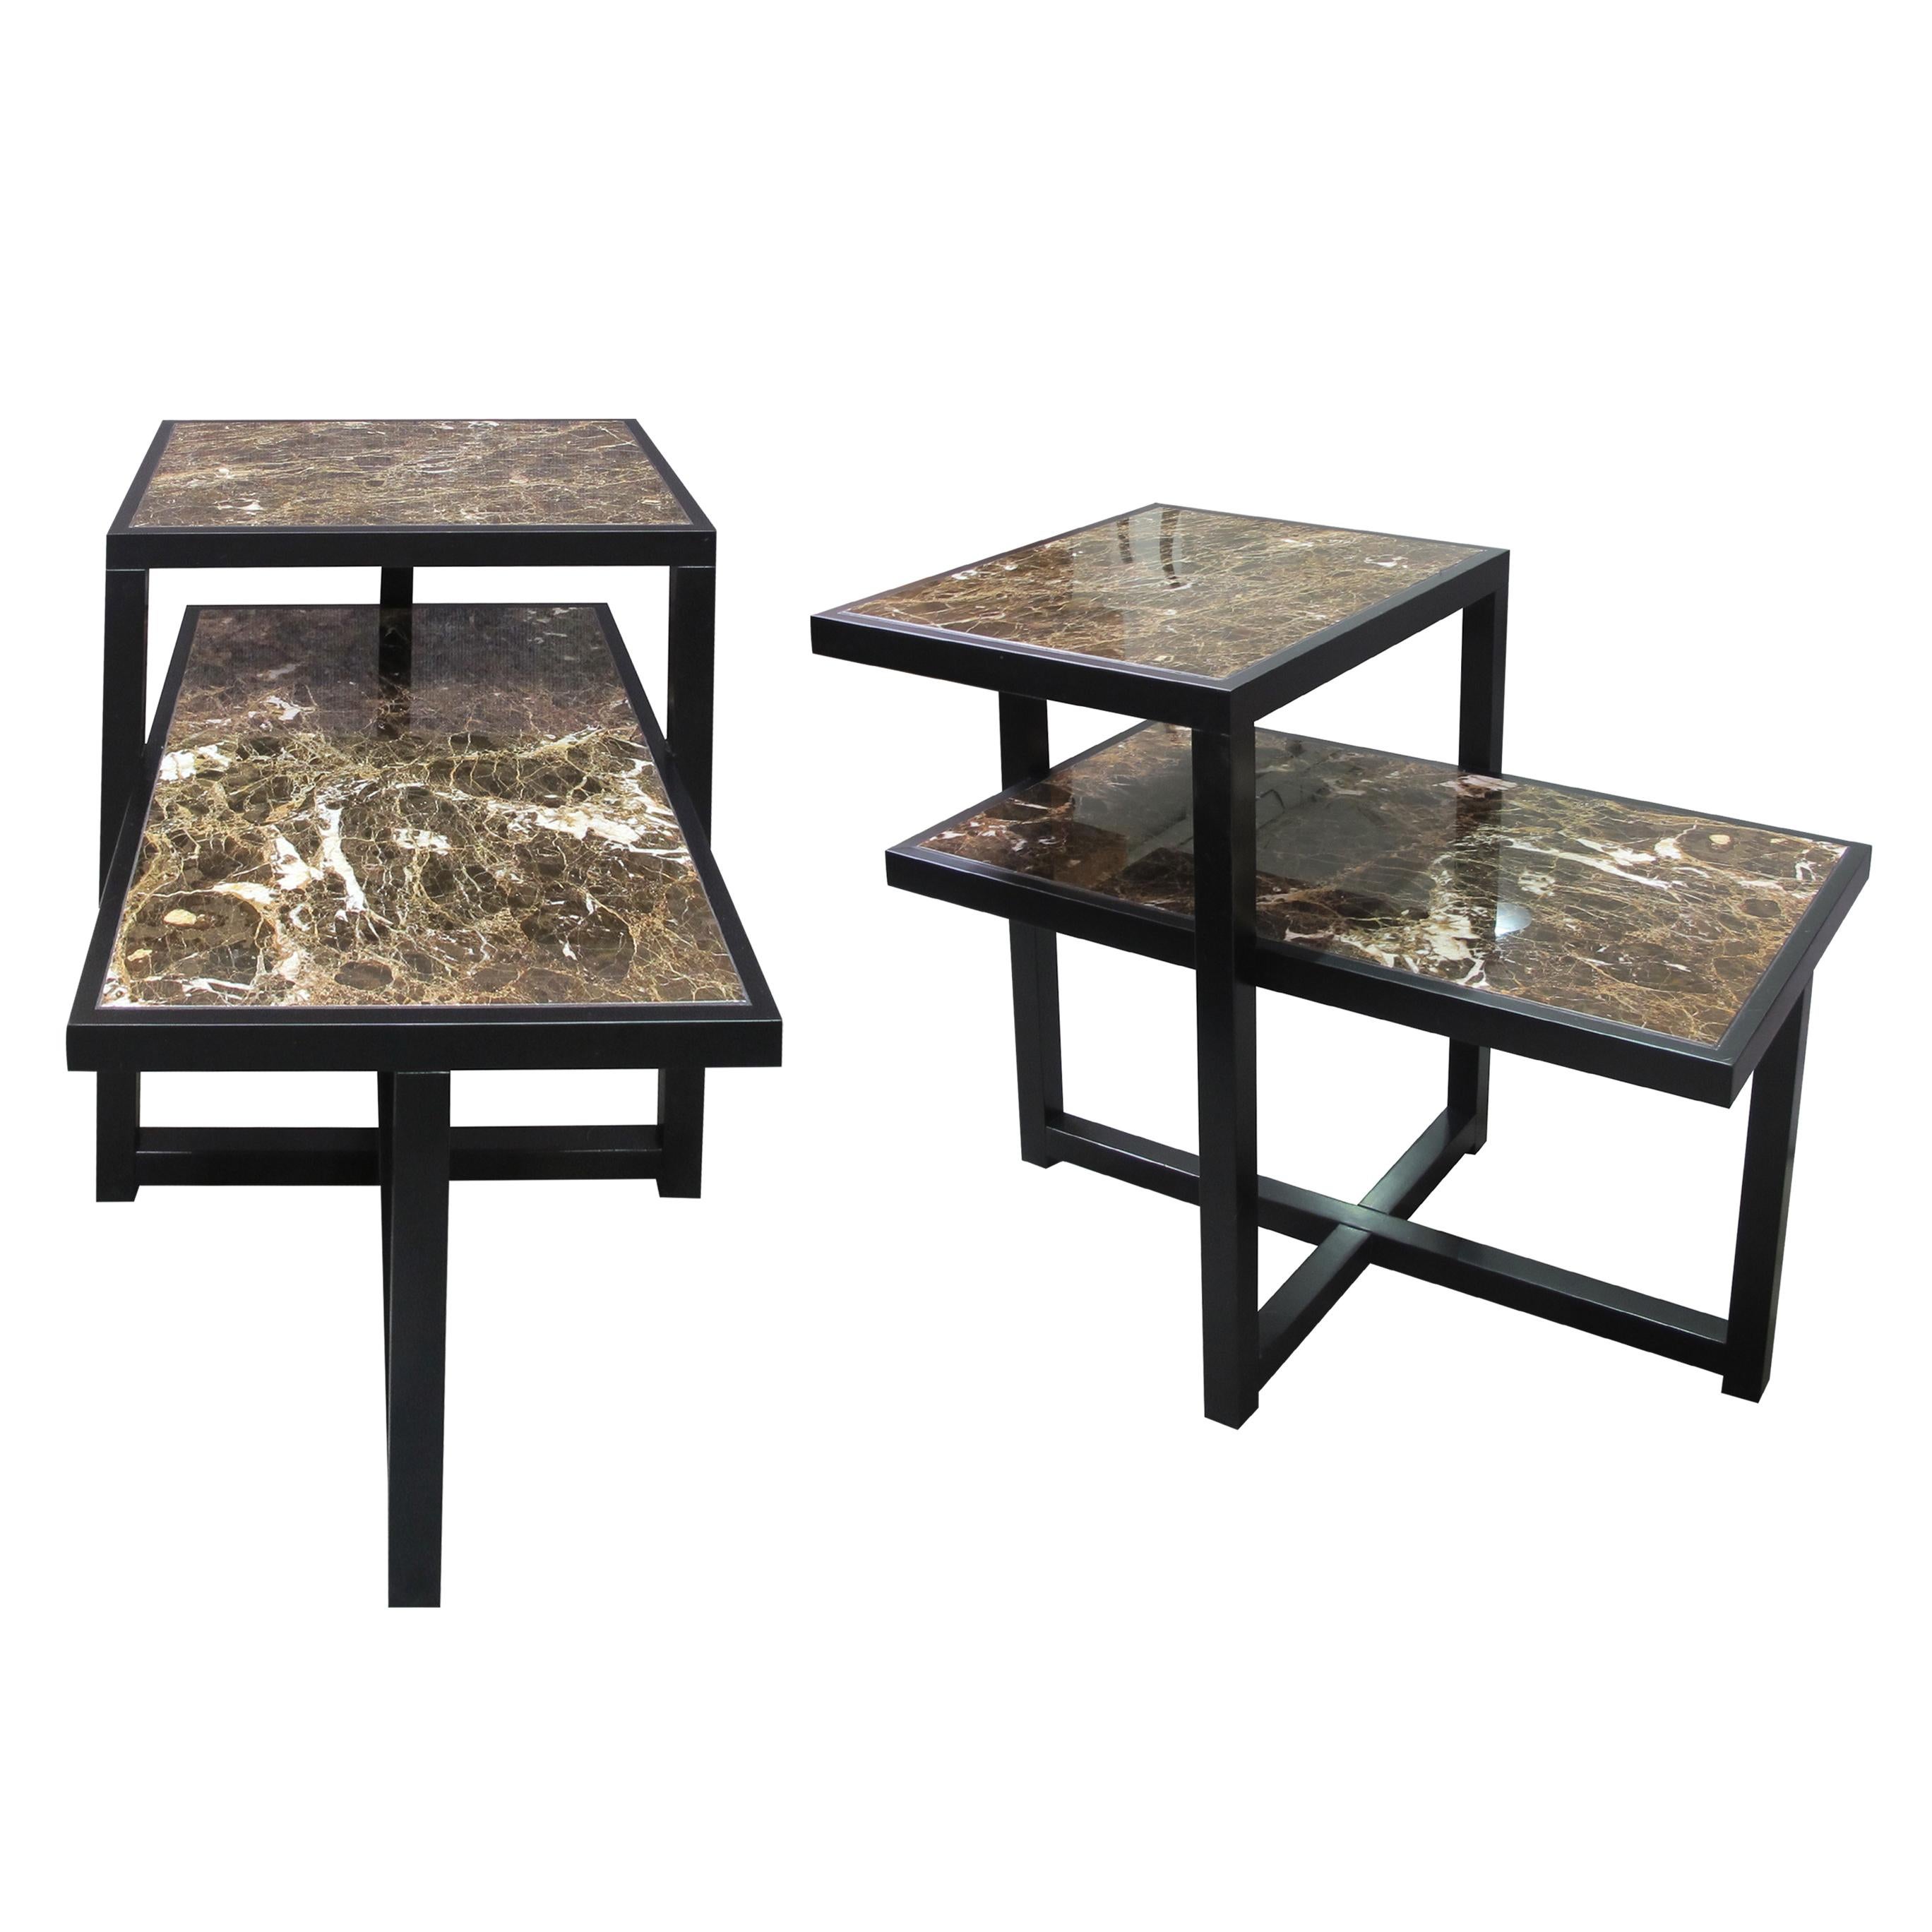 Pair of 1960s Italian two-tiered side or end tables of a Modernist design. The dark brown structural wooden frame highlights and contrasts beautifully with the Marrón Emperador marbles tops. These elegant tables look amazing from every perspective